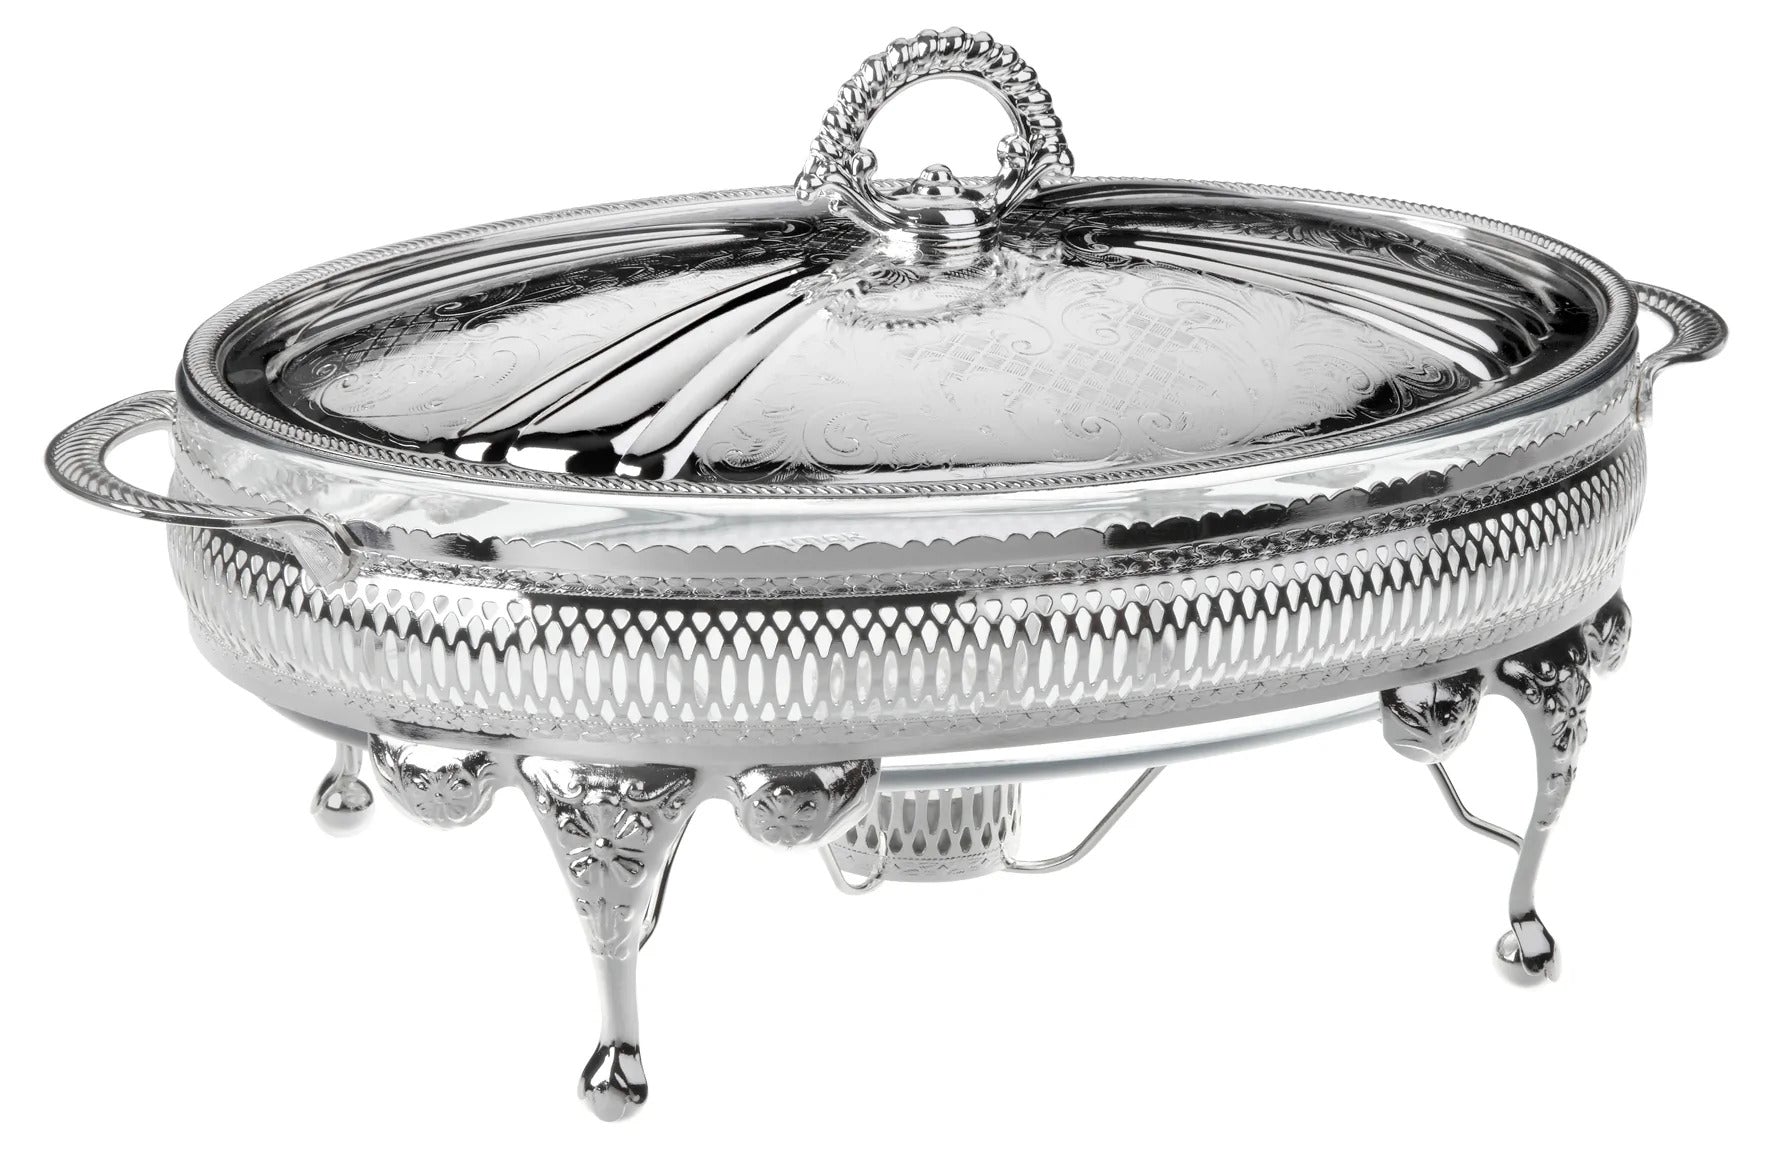 Queen Anne - Oval Tray with Handles - Silver Plated Metal - 45x25.5cm